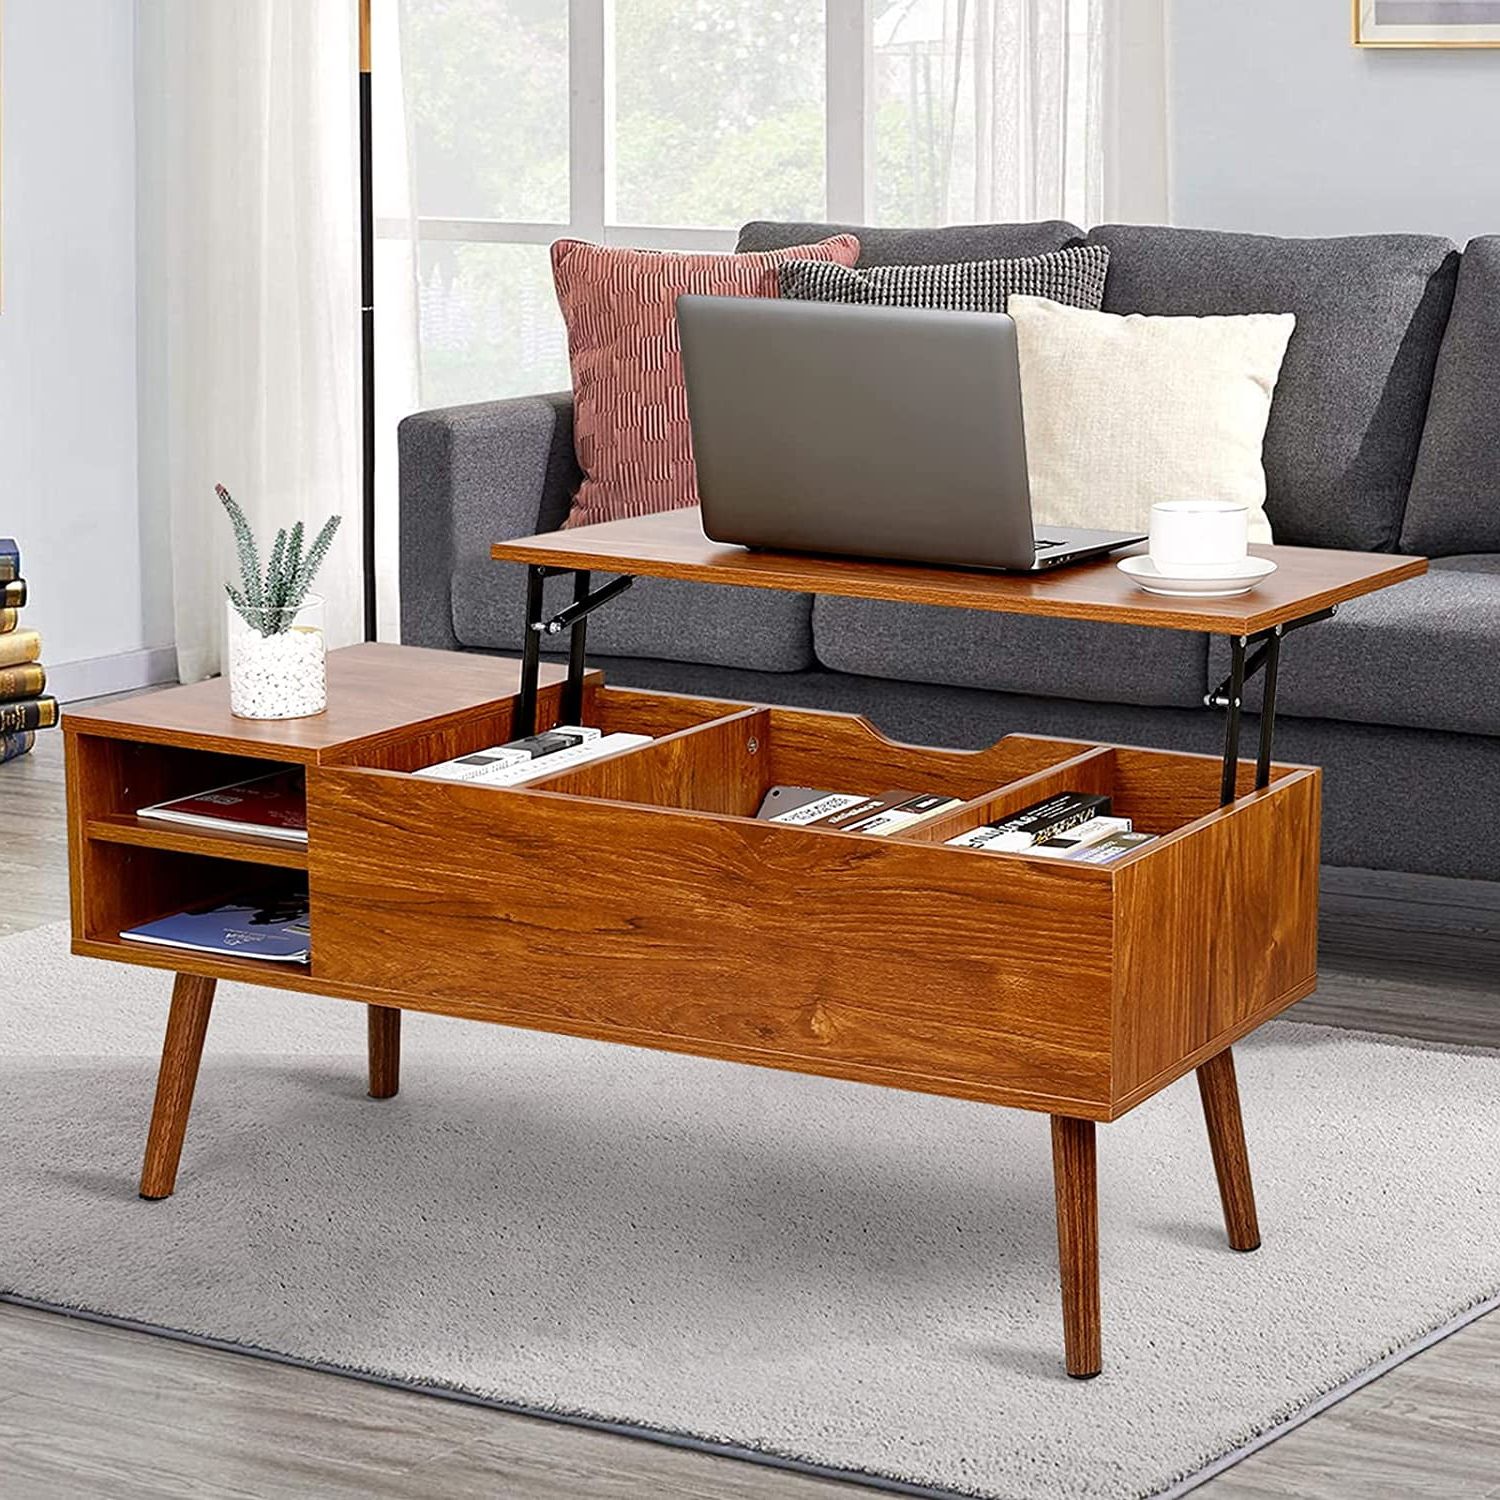 Featured Photo of 20 Photos Modern Coffee Tables with Hidden Storage Compartments